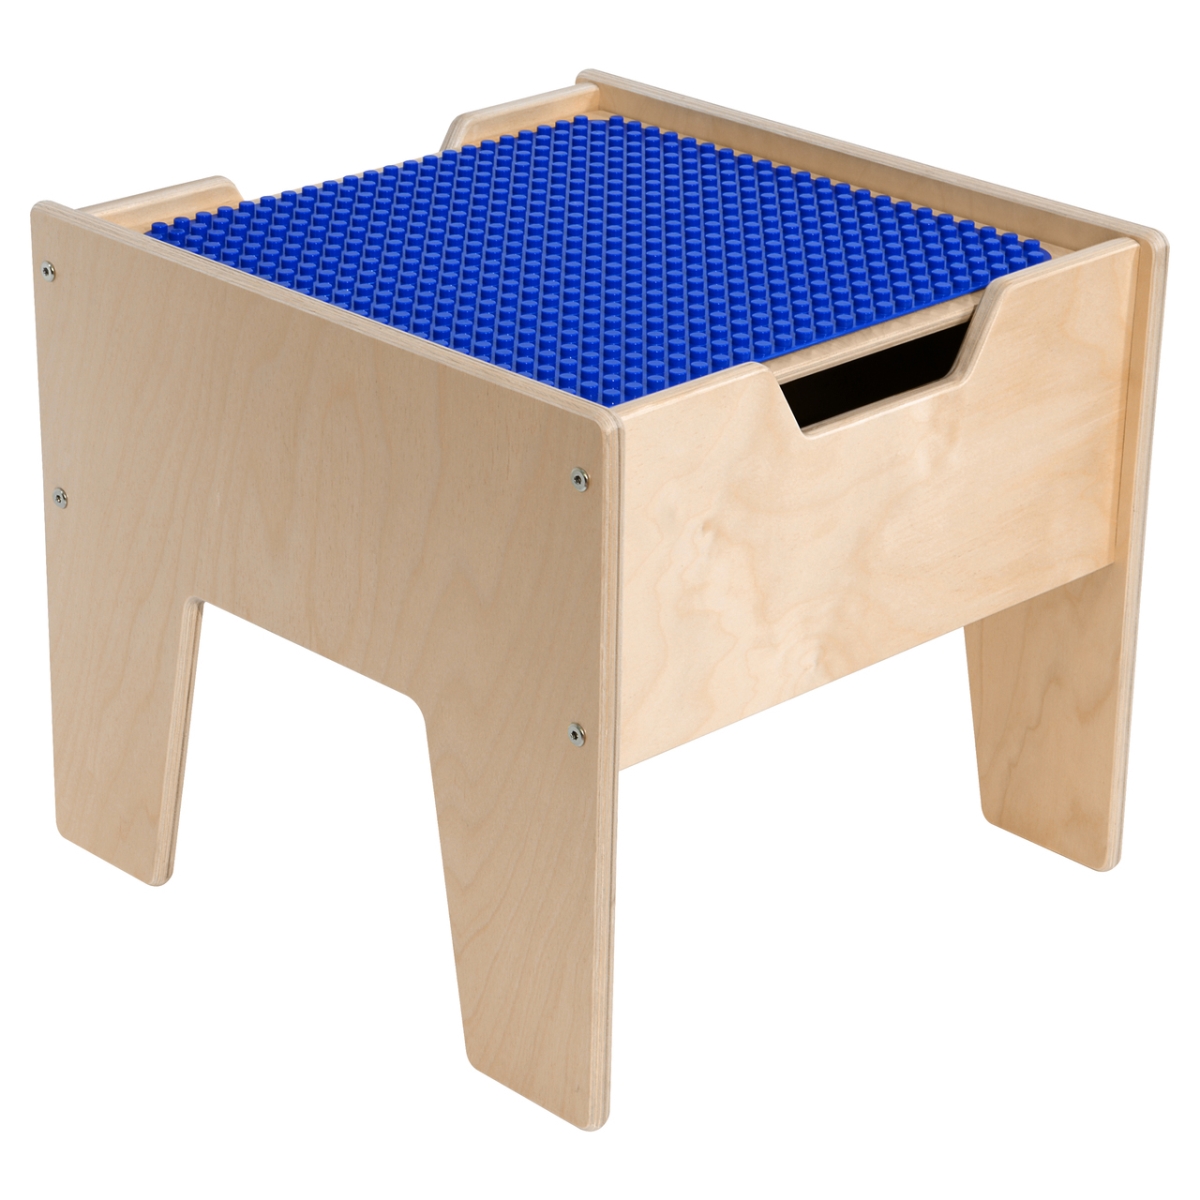 C991300f-pb 2-n-1 Activity Table With Blue Duplo Compatible Top - Assembled